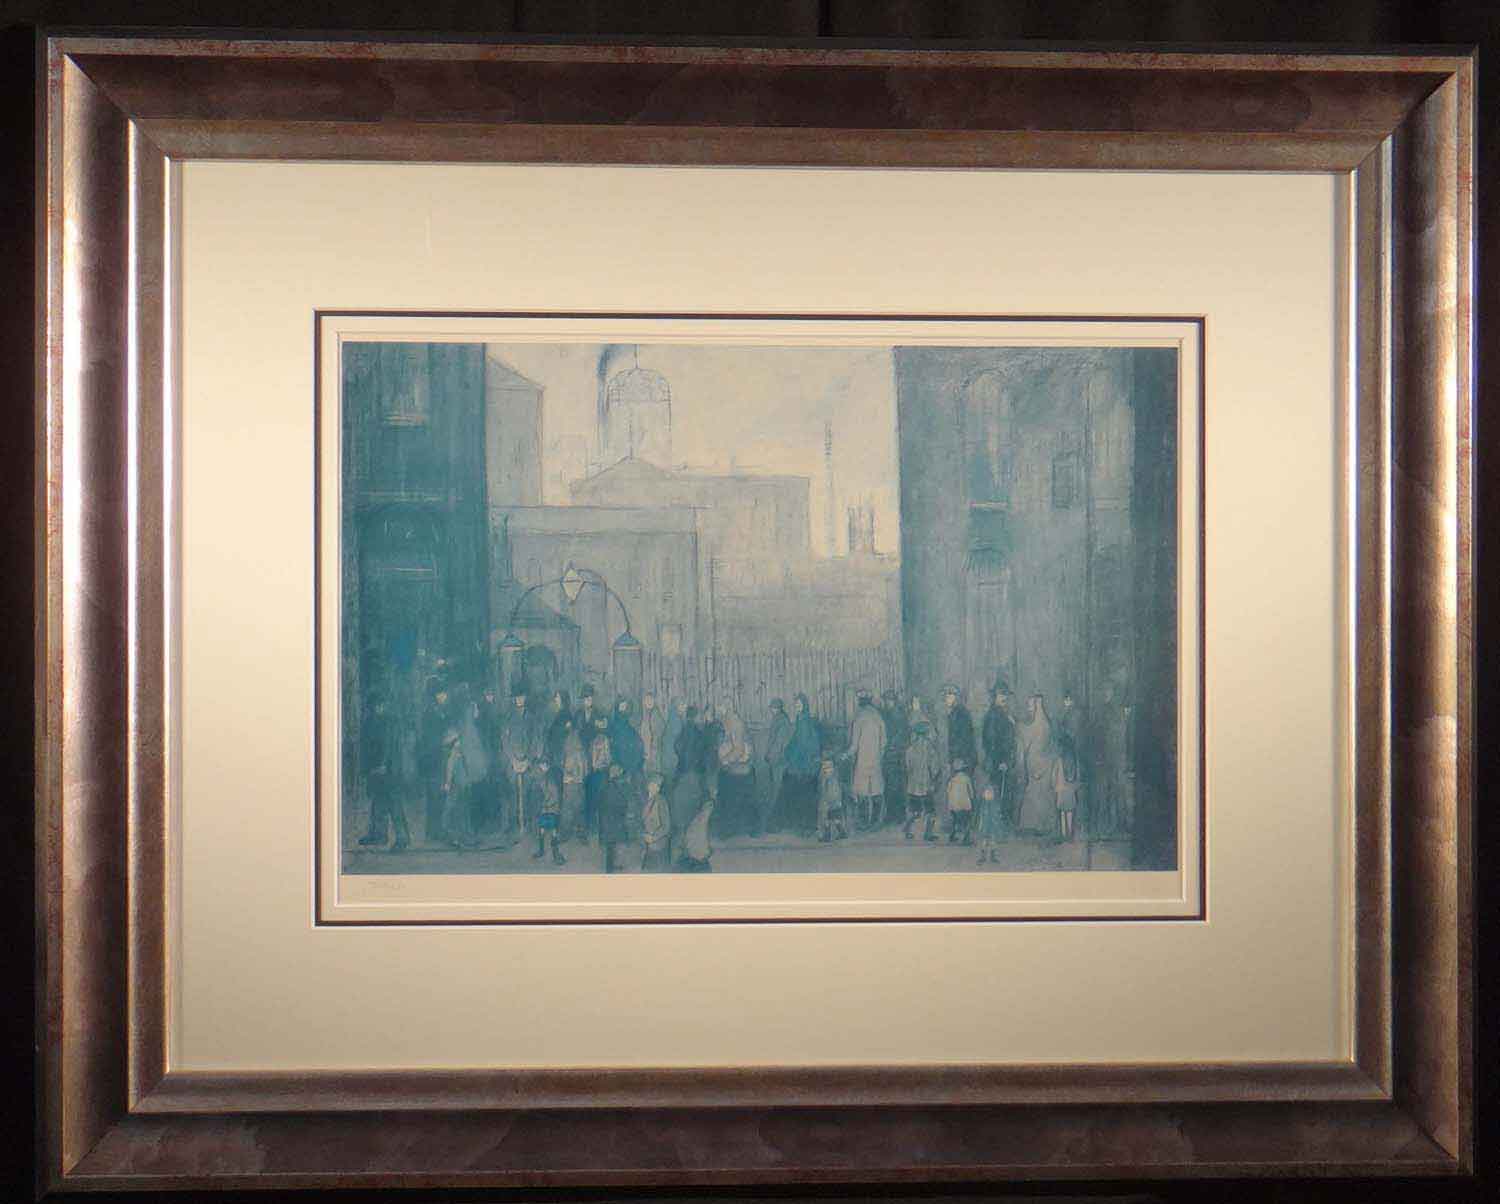 lowry, limited edition print, outside the mill 1930, 